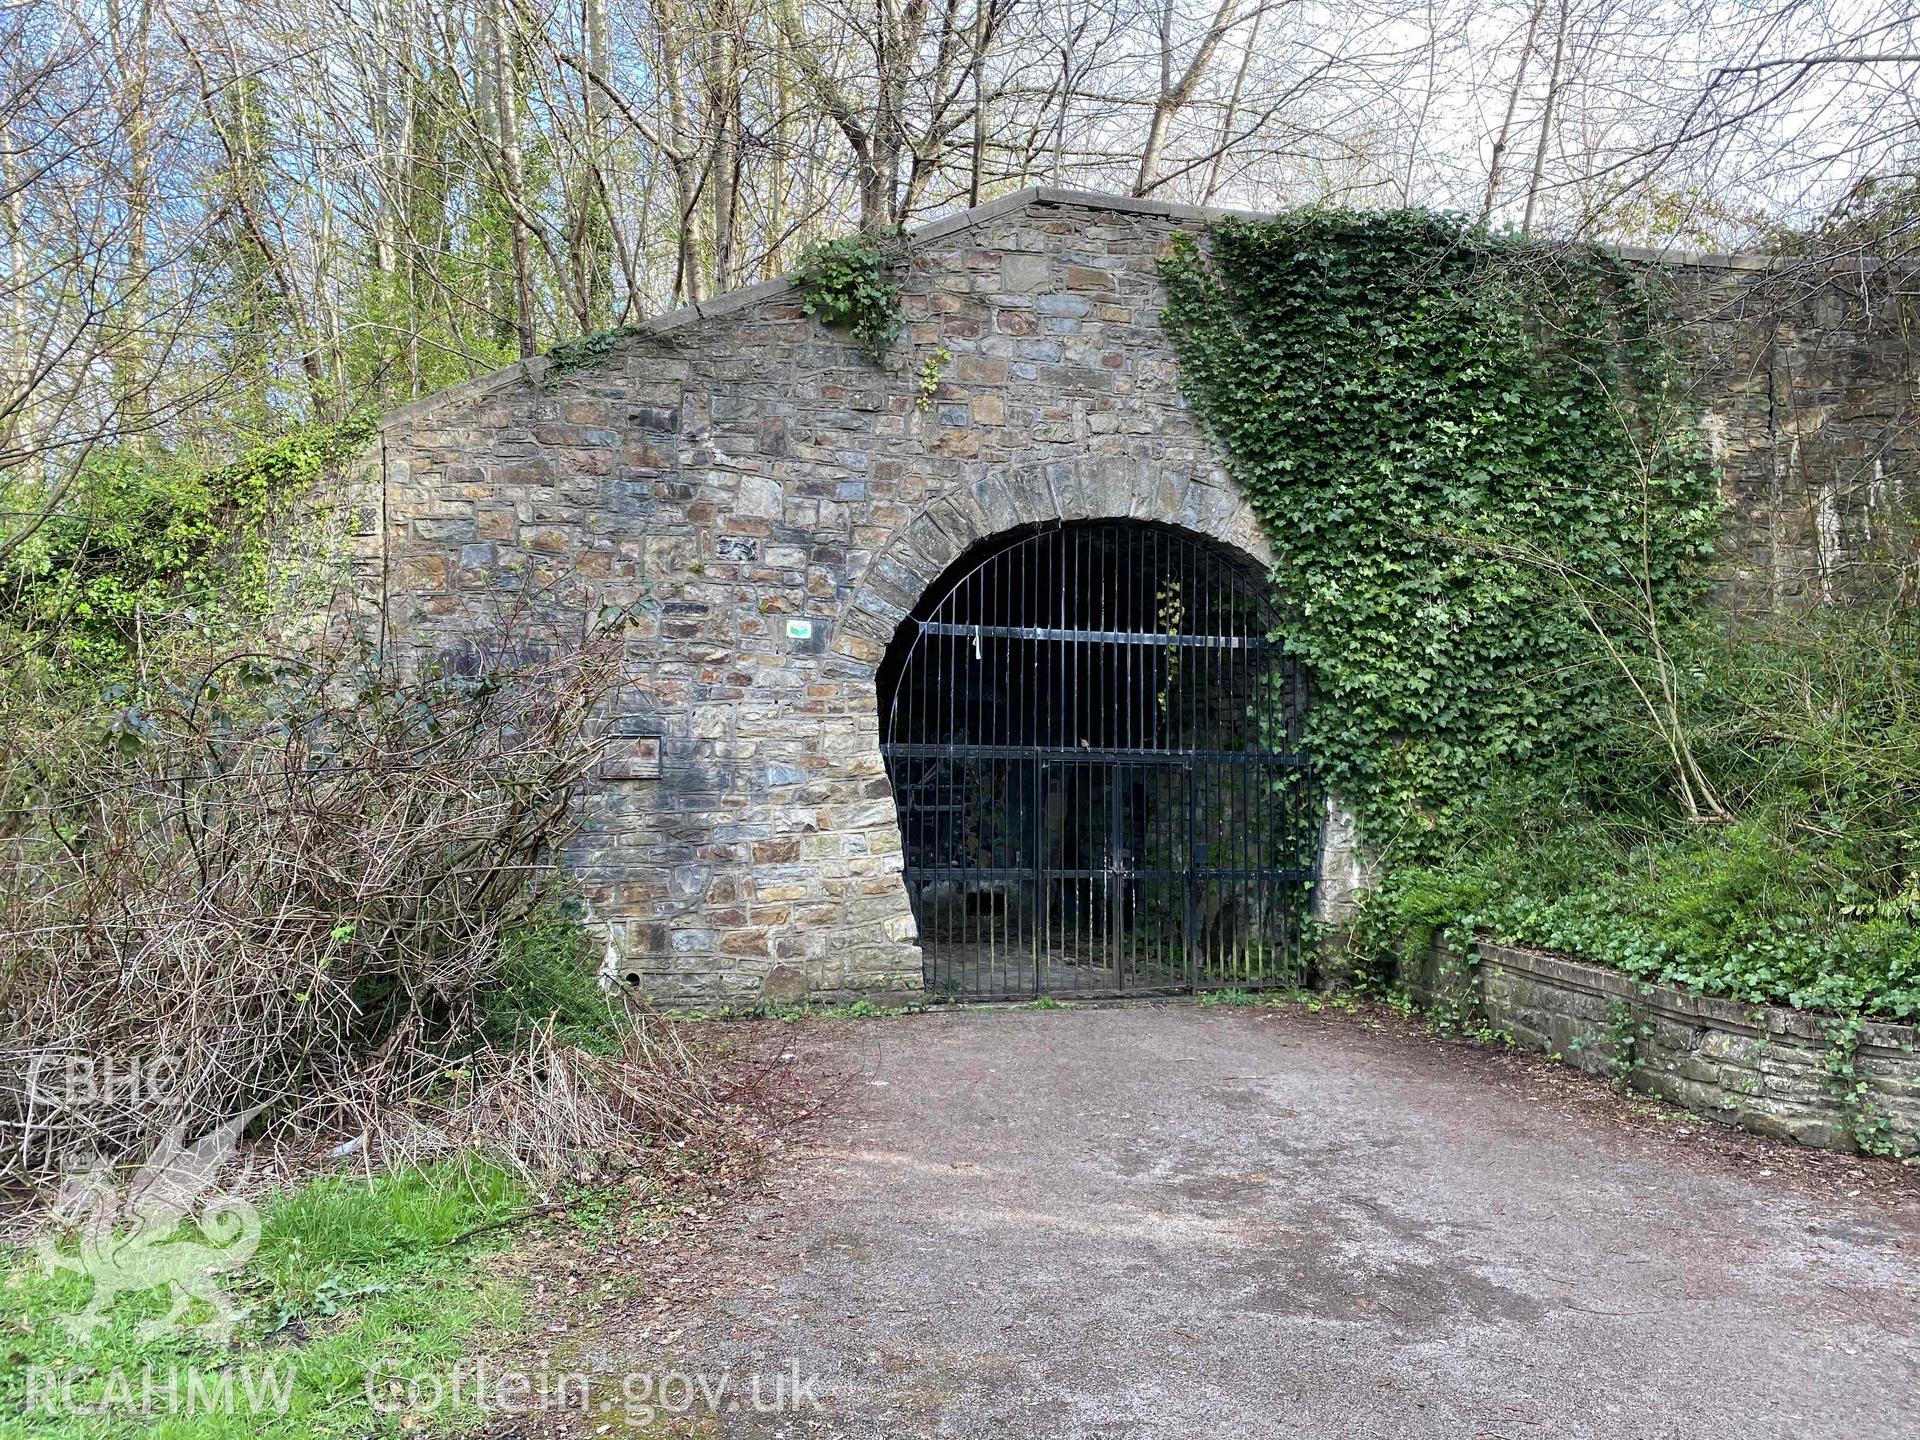 Digital photograph showing external view of Trevithick's Tunnel. Produced by Paul Davis in 2020